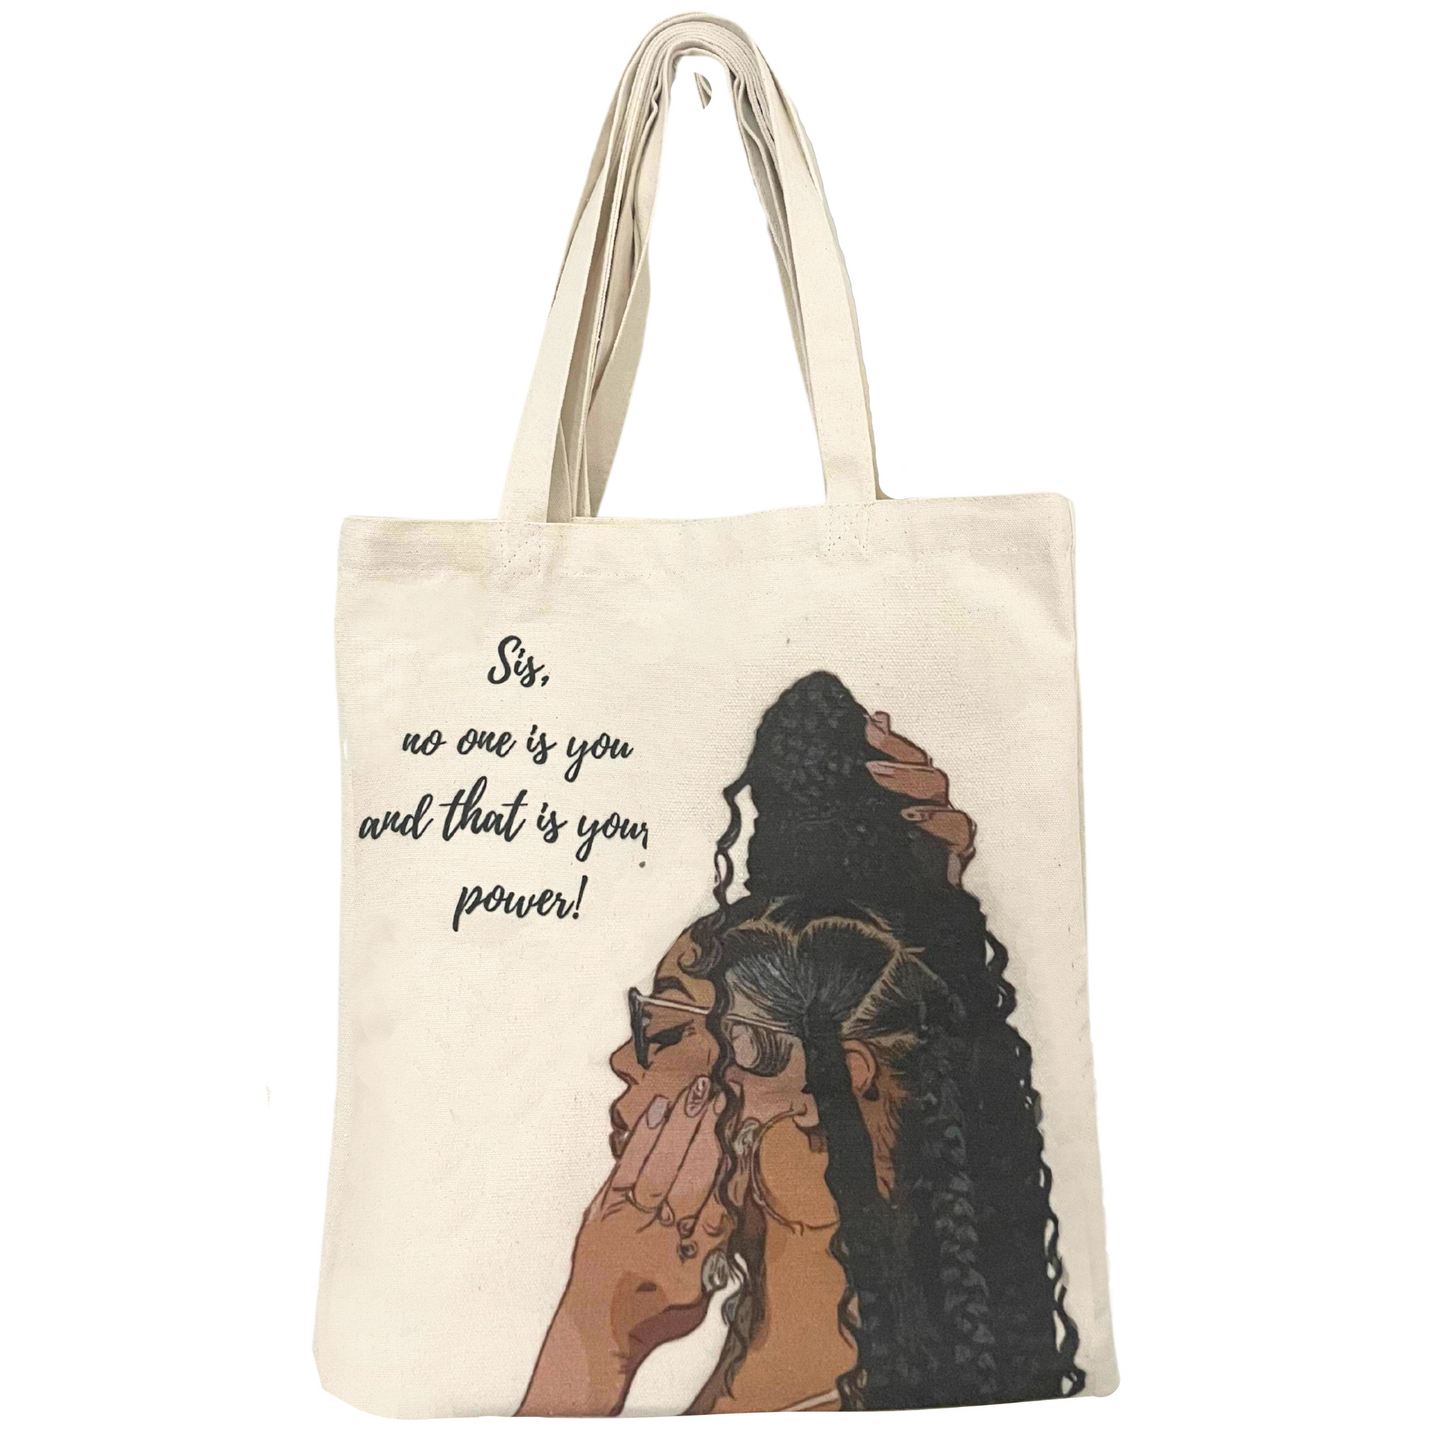 Get Braided - Cotton Shopping Bags (100% Cotton)